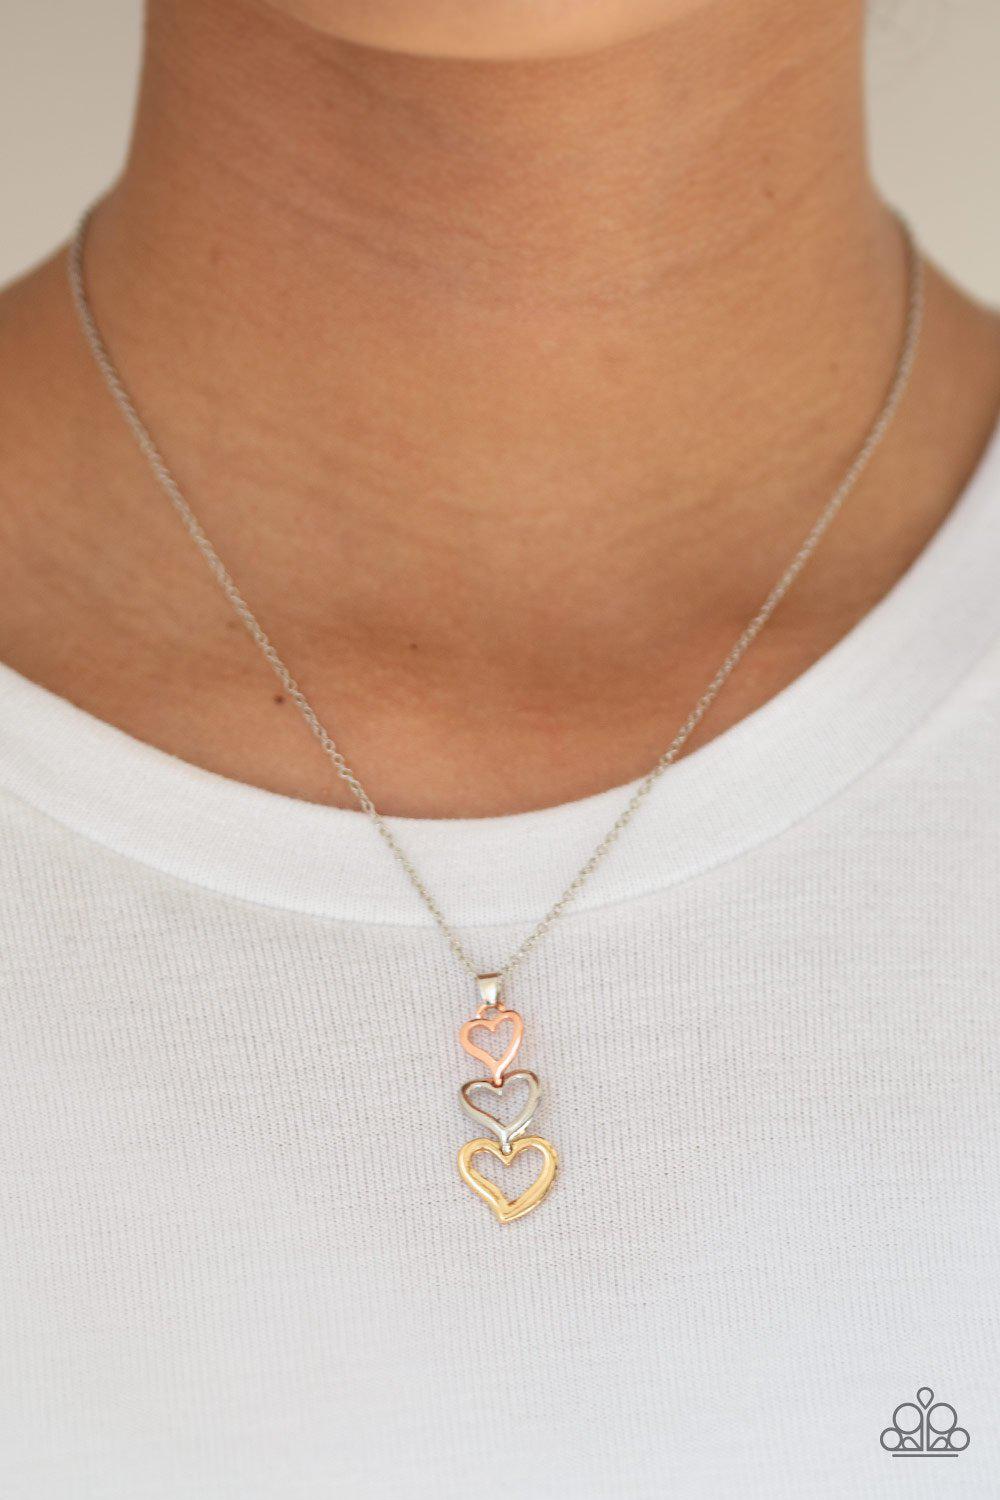 Hearts Aflutter Silver, Gold and Copper Heart Necklace - Paparazzi Accessories-CarasShop.com - $5 Jewelry by Cara Jewels